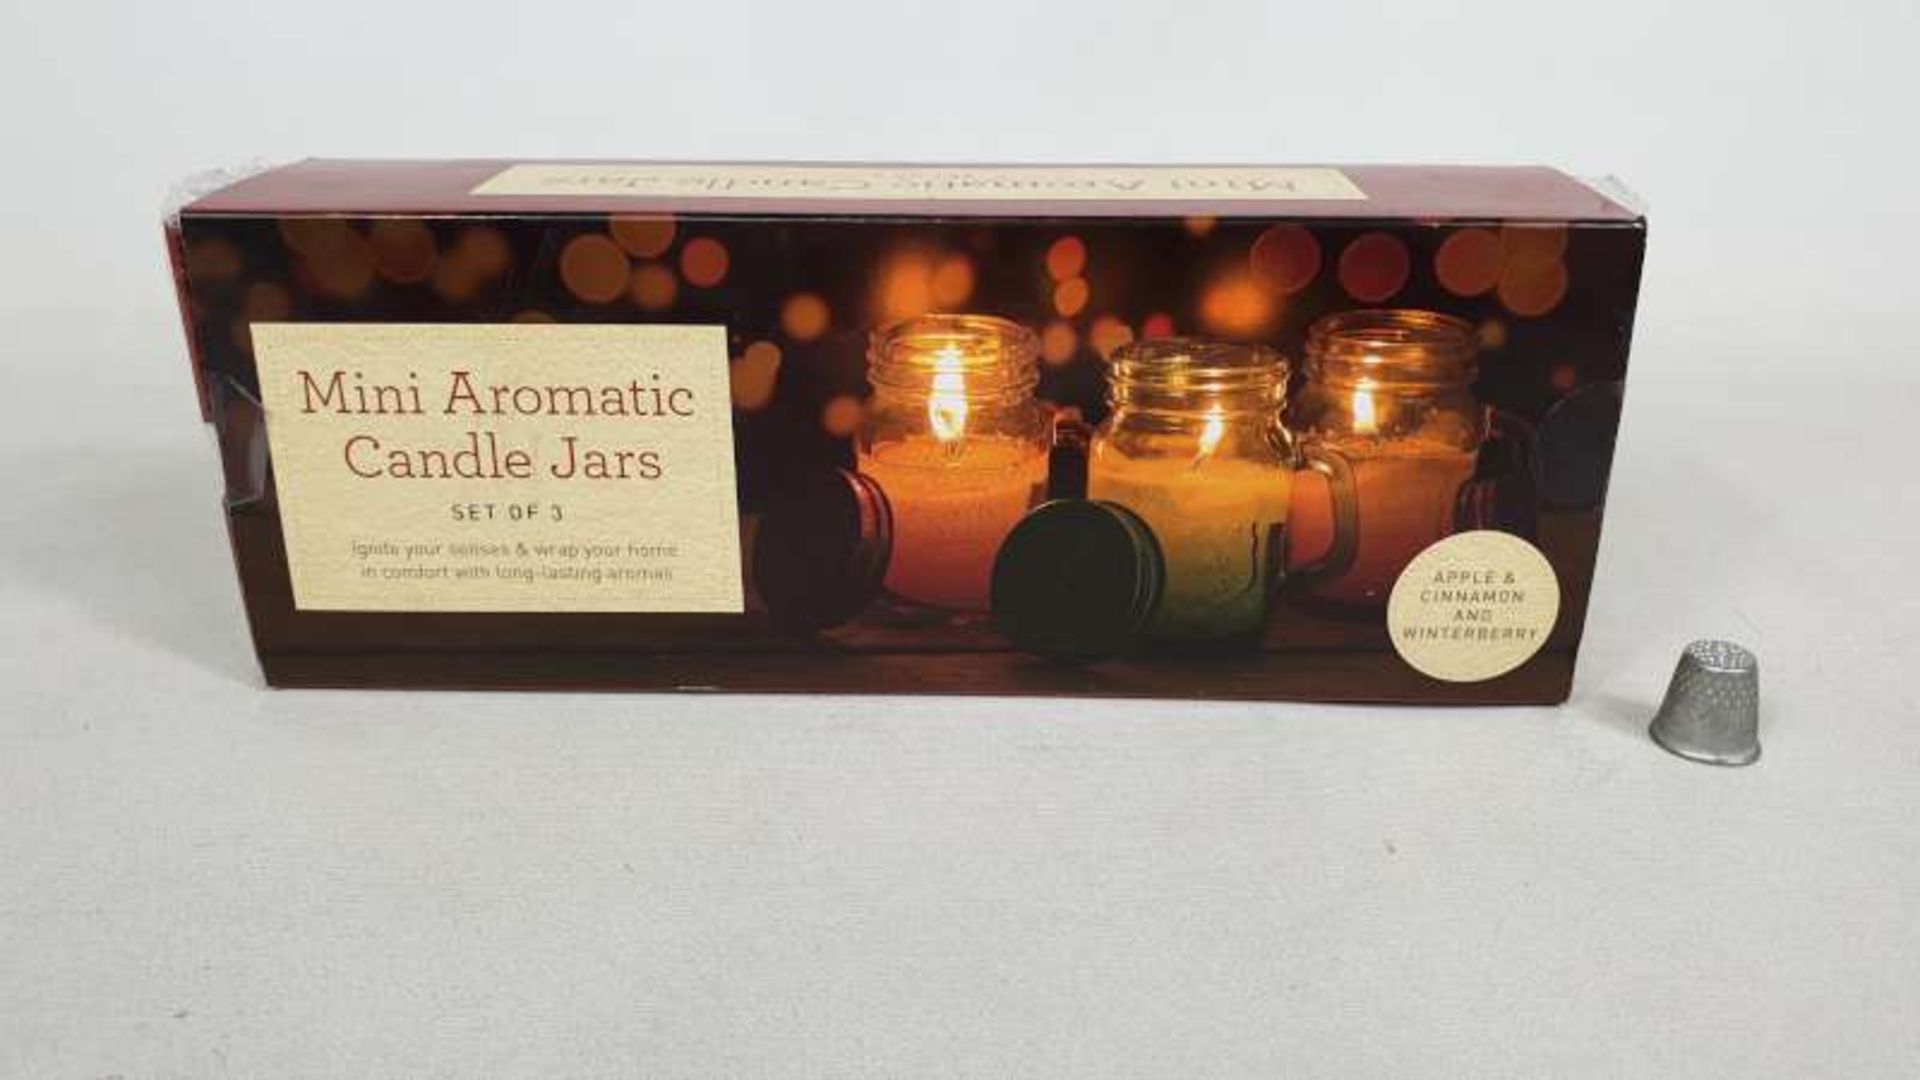 48 X SETS OF 3 MINI AROMATIC CANDLES JARS IN 4 BOXES